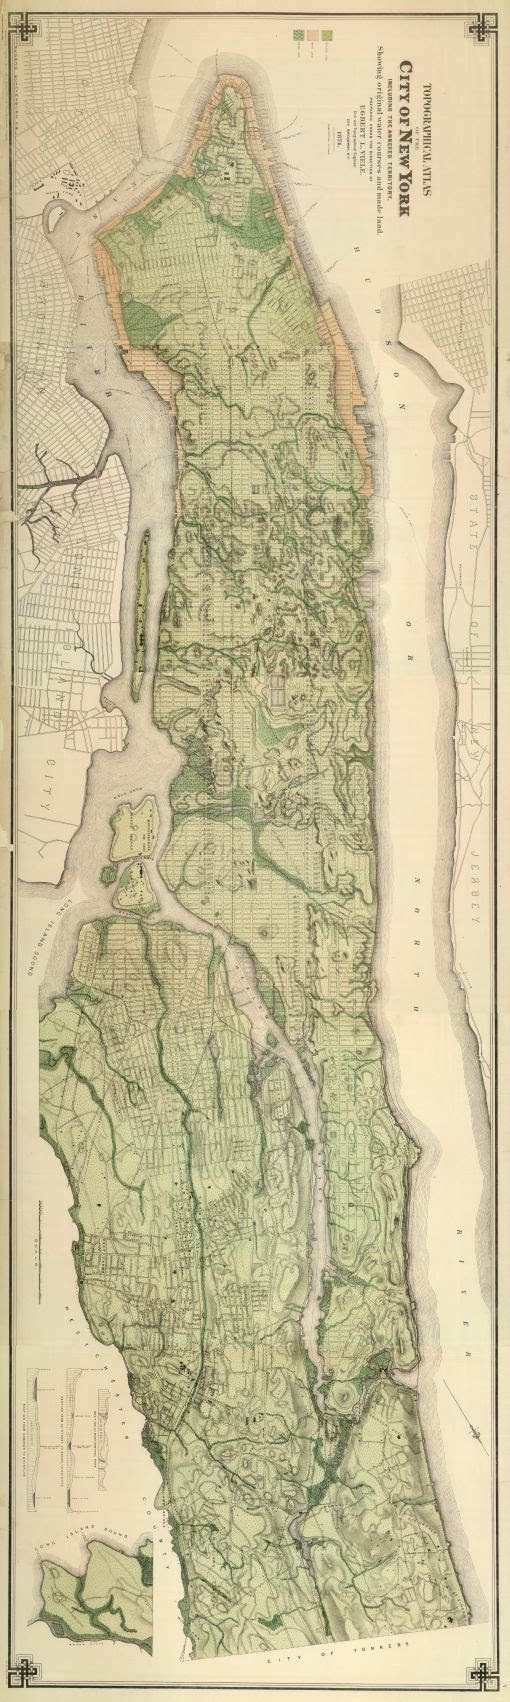 19th century topographic map of NYC